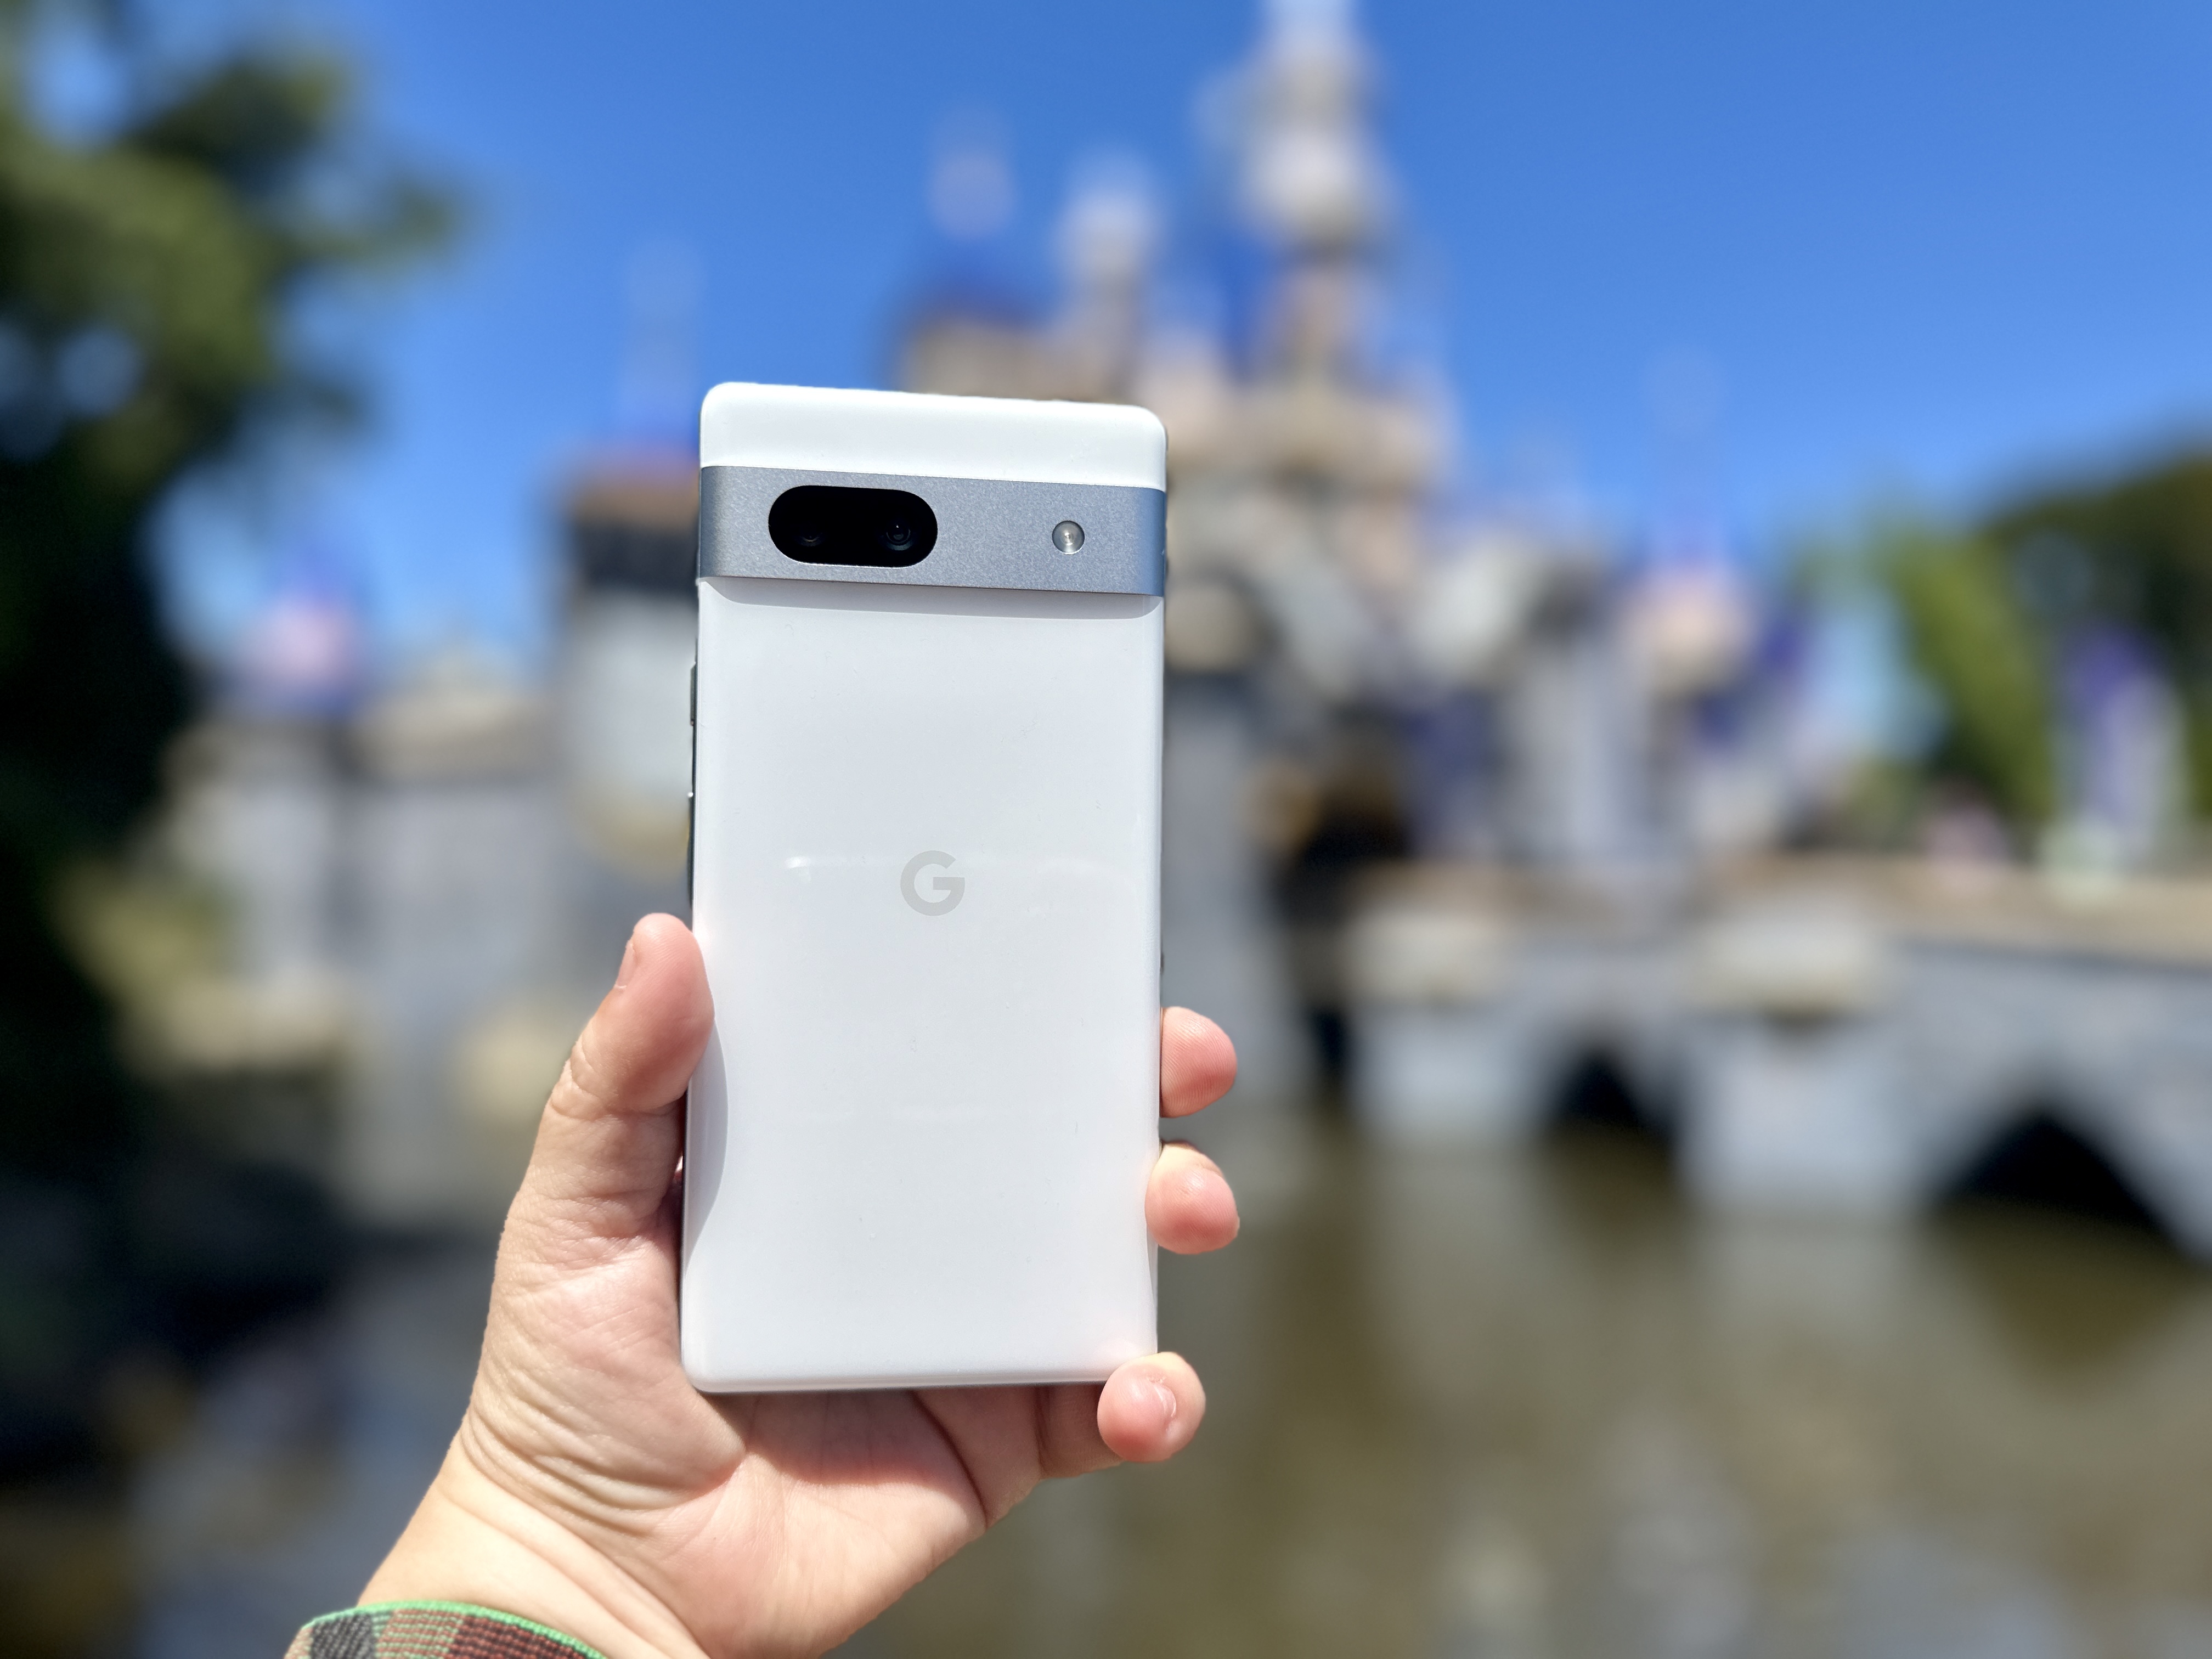 Google Pixel 7a: Price, specs, features - Android Authority